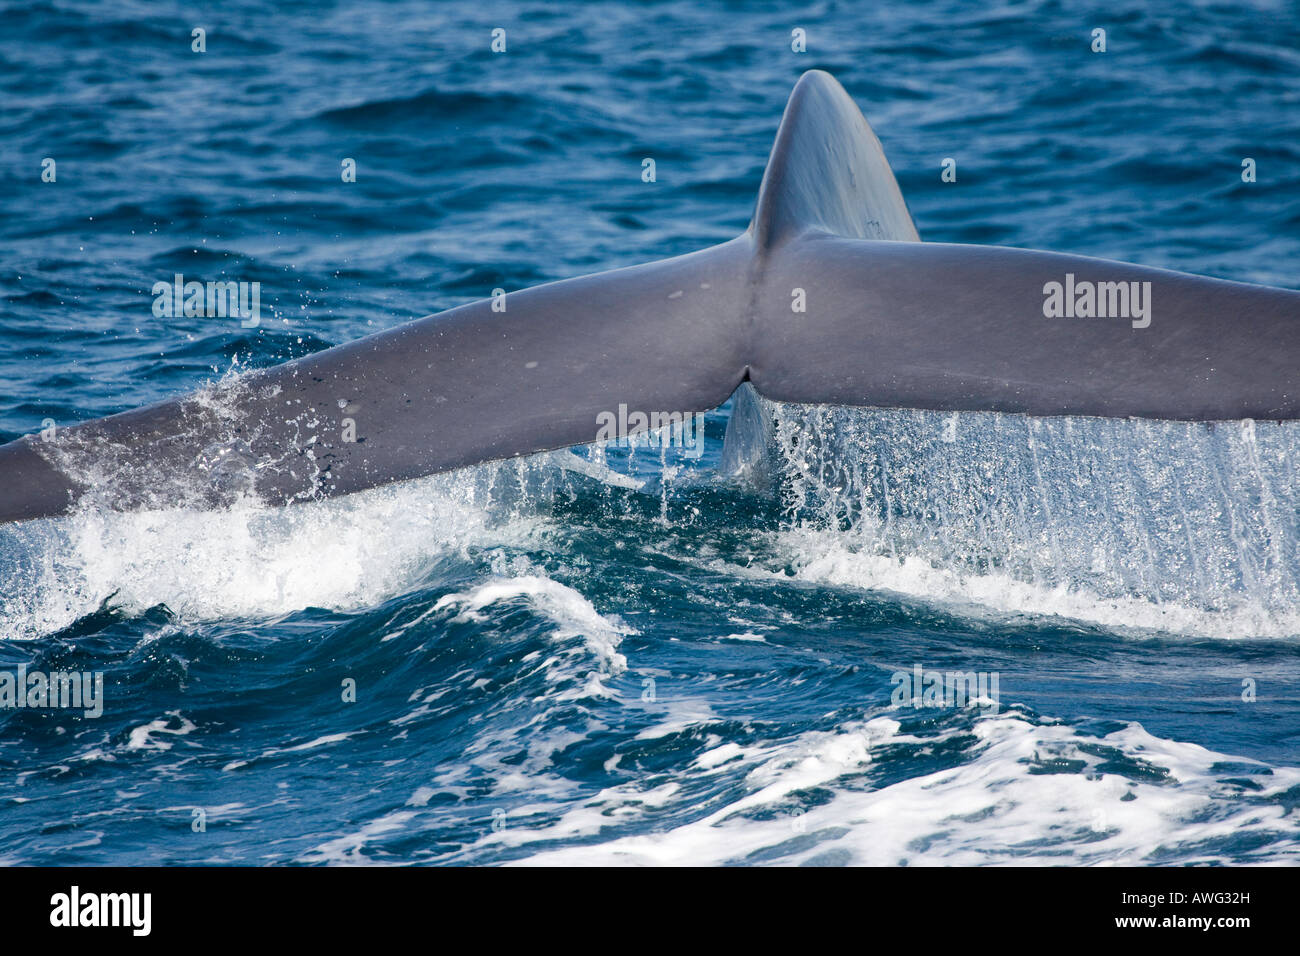 The tail of a blue whale, Balaenoptera musculus, off the coast of California, USA. Stock Photo